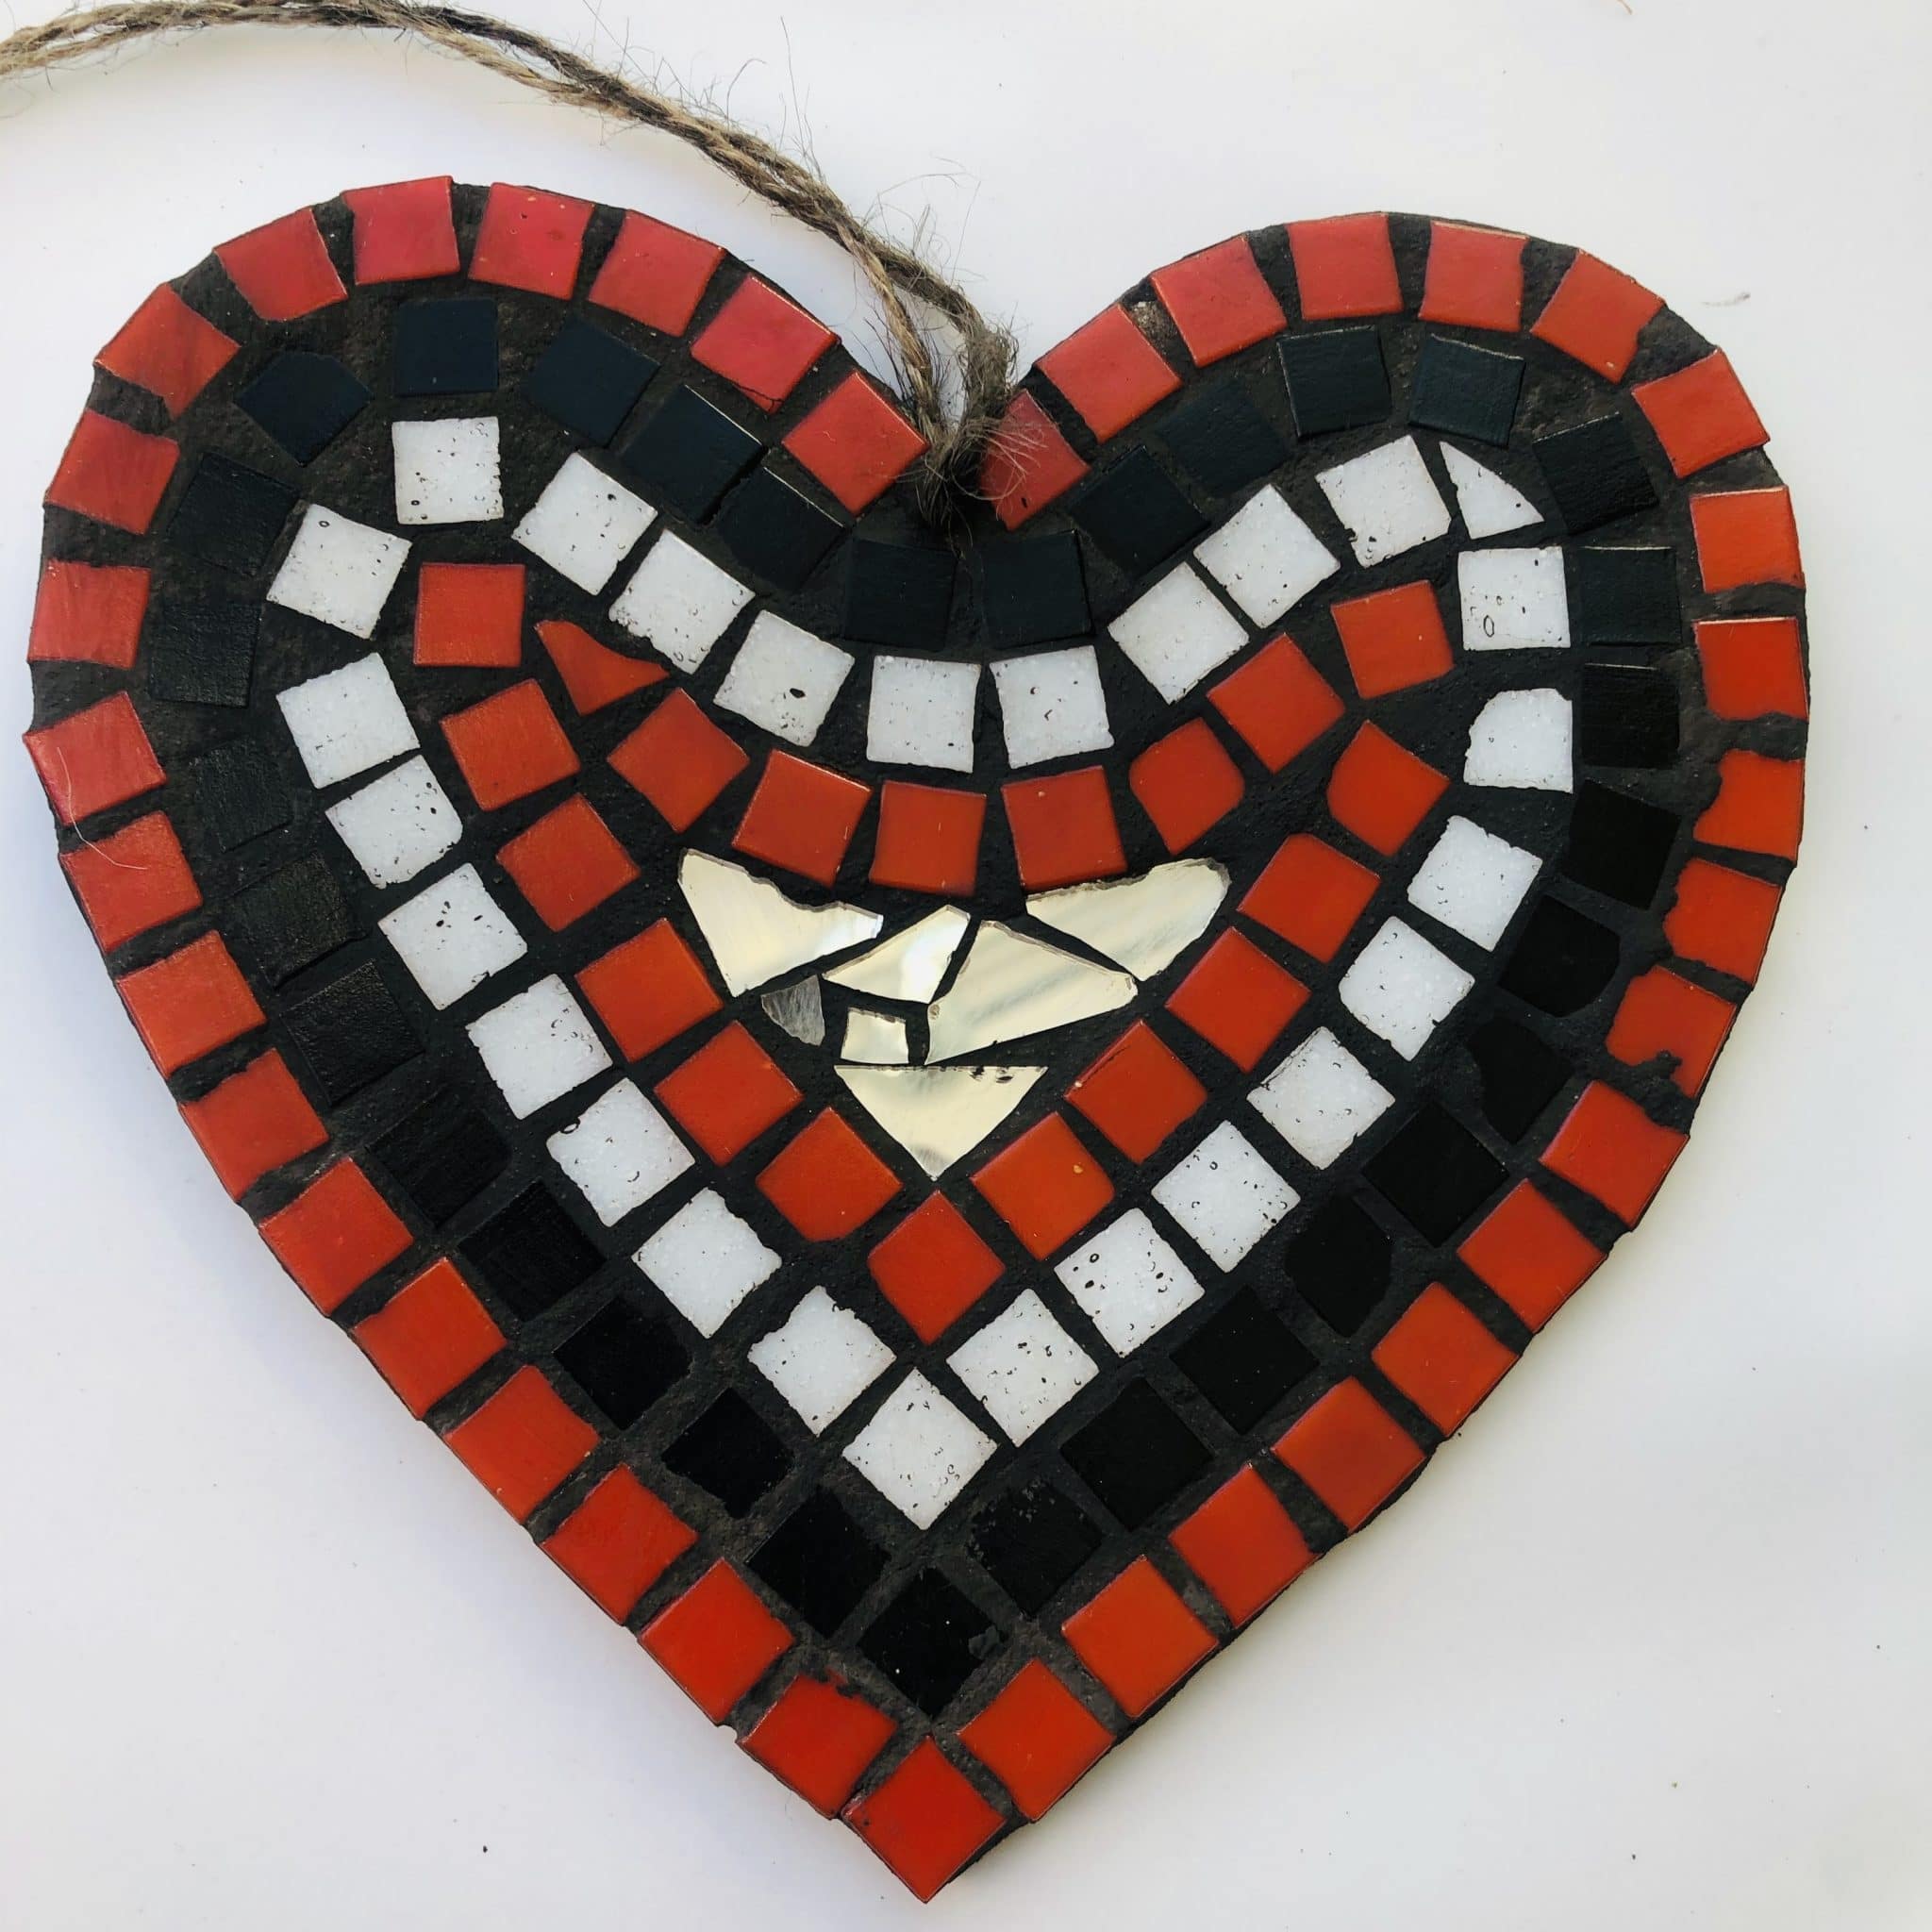 Small heart shaped mosaic with black, red, white, and gold colours